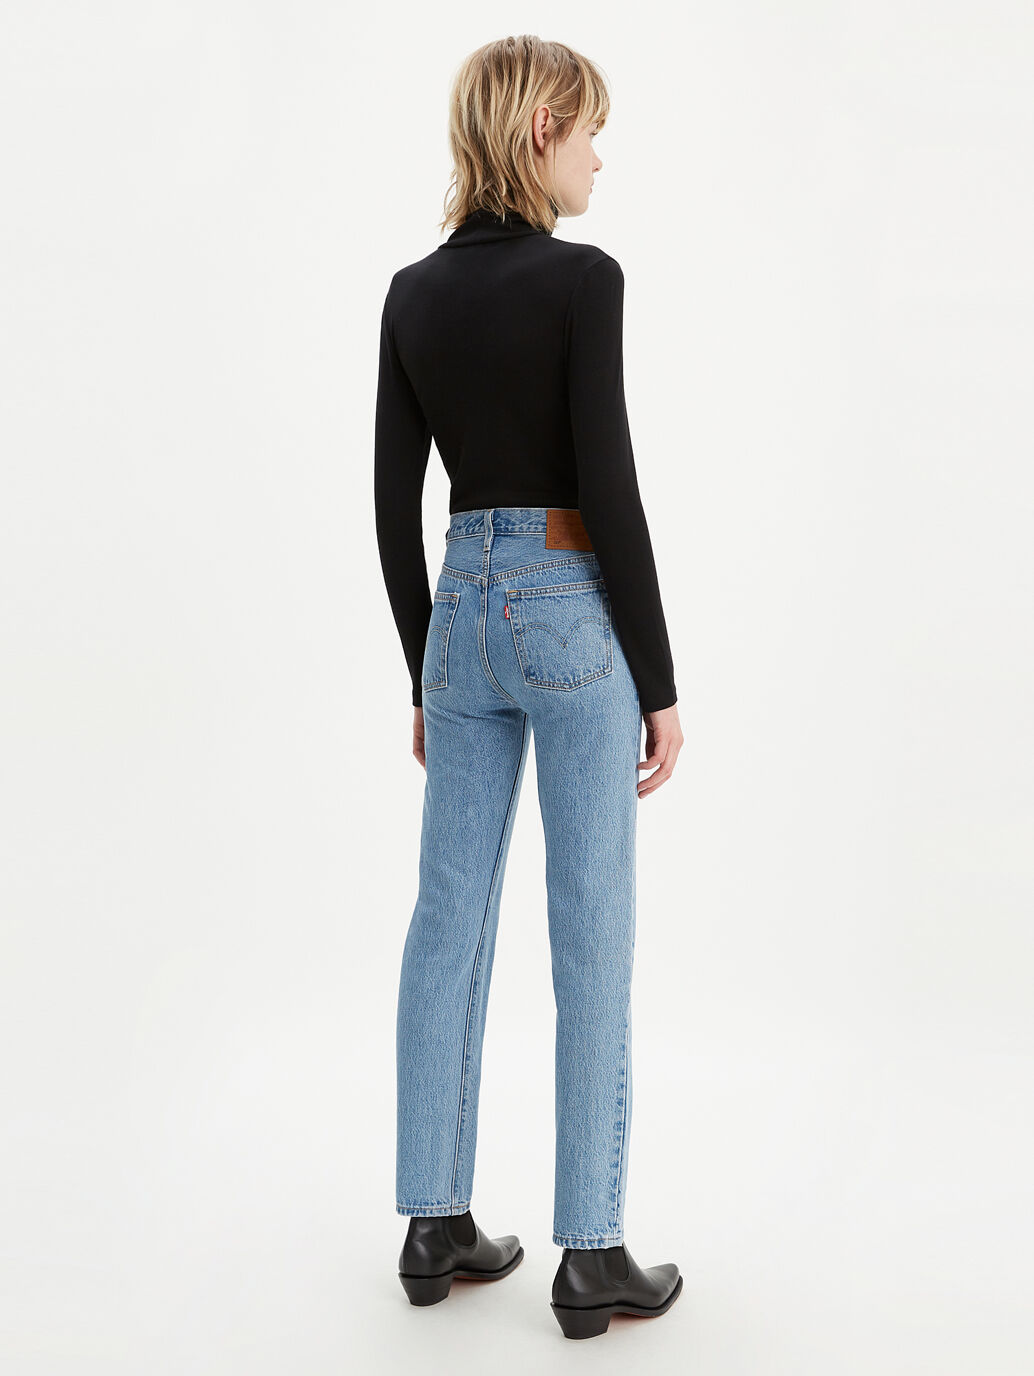 who sells levis 501 jeans